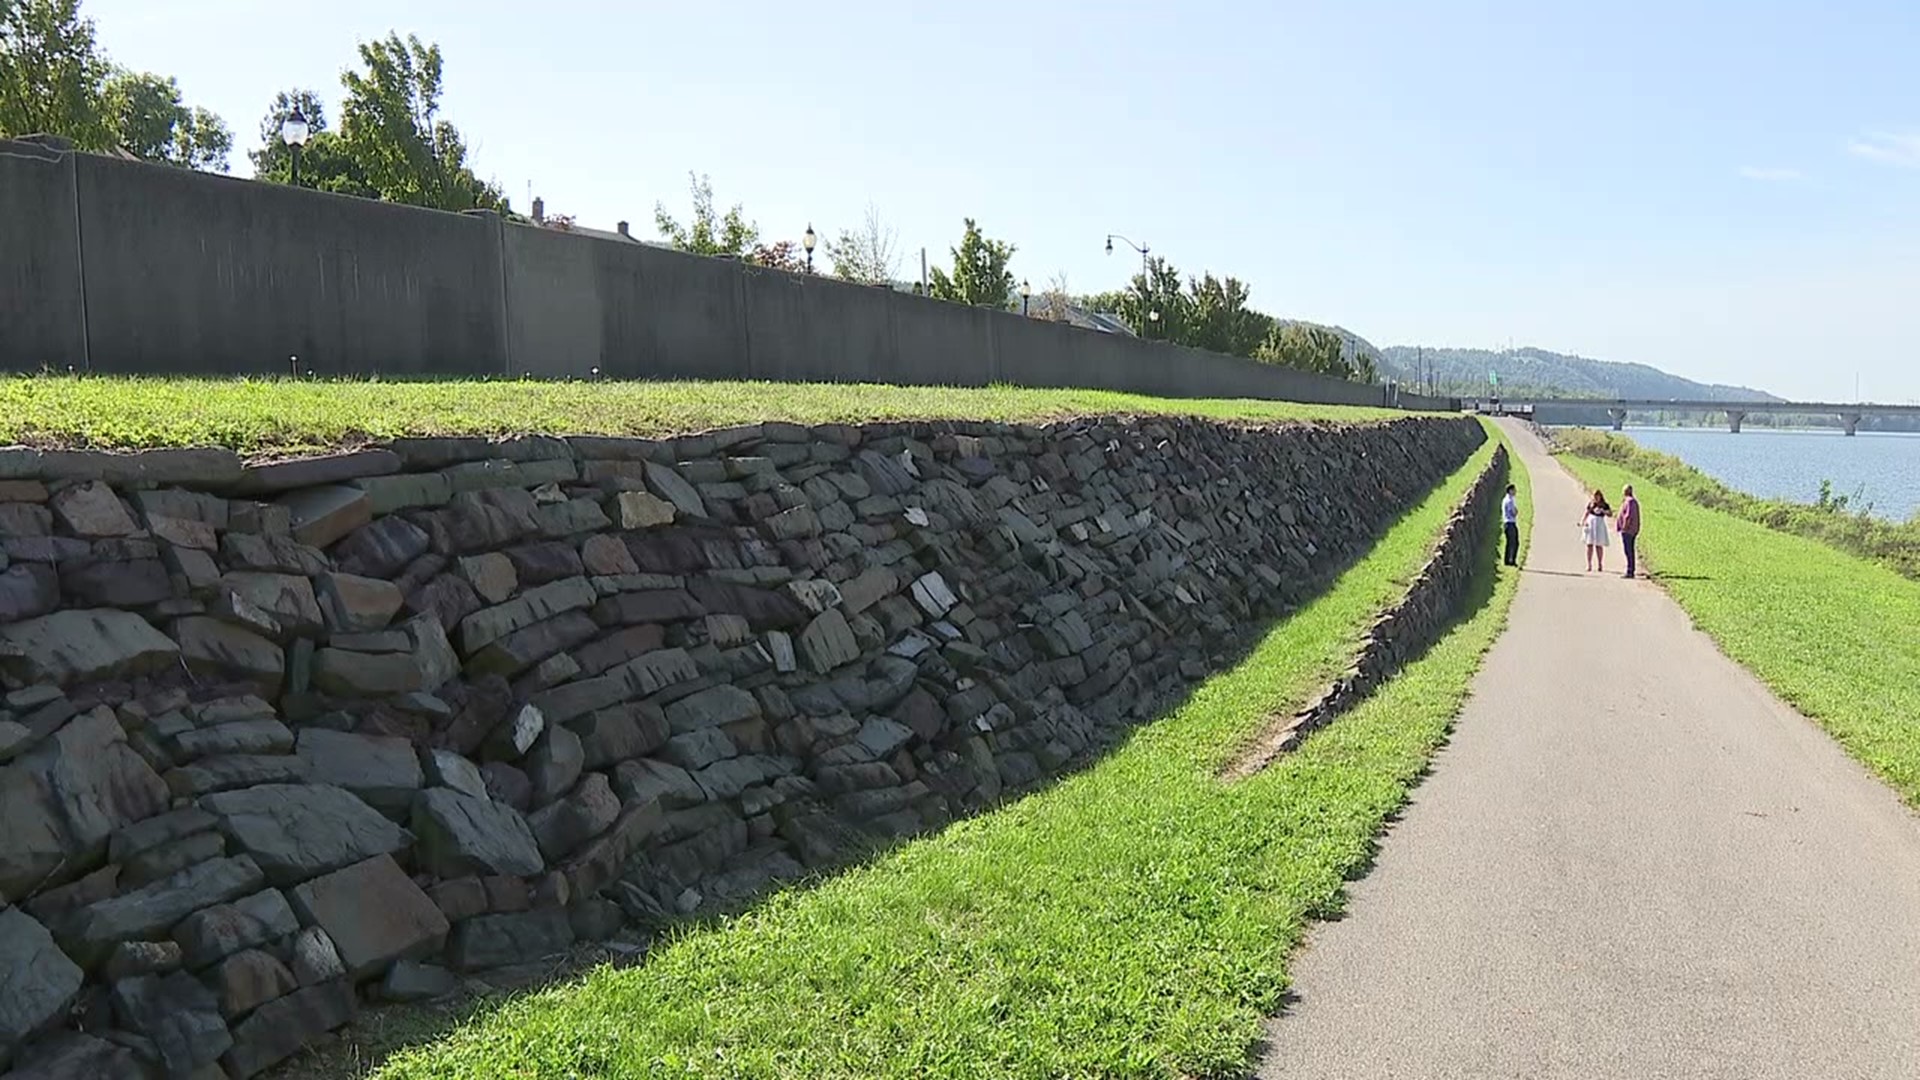 Sections of Sunbury's floodwall have seen better days.  But thanks to a state grant, a portion of the floodwall will be replaced.